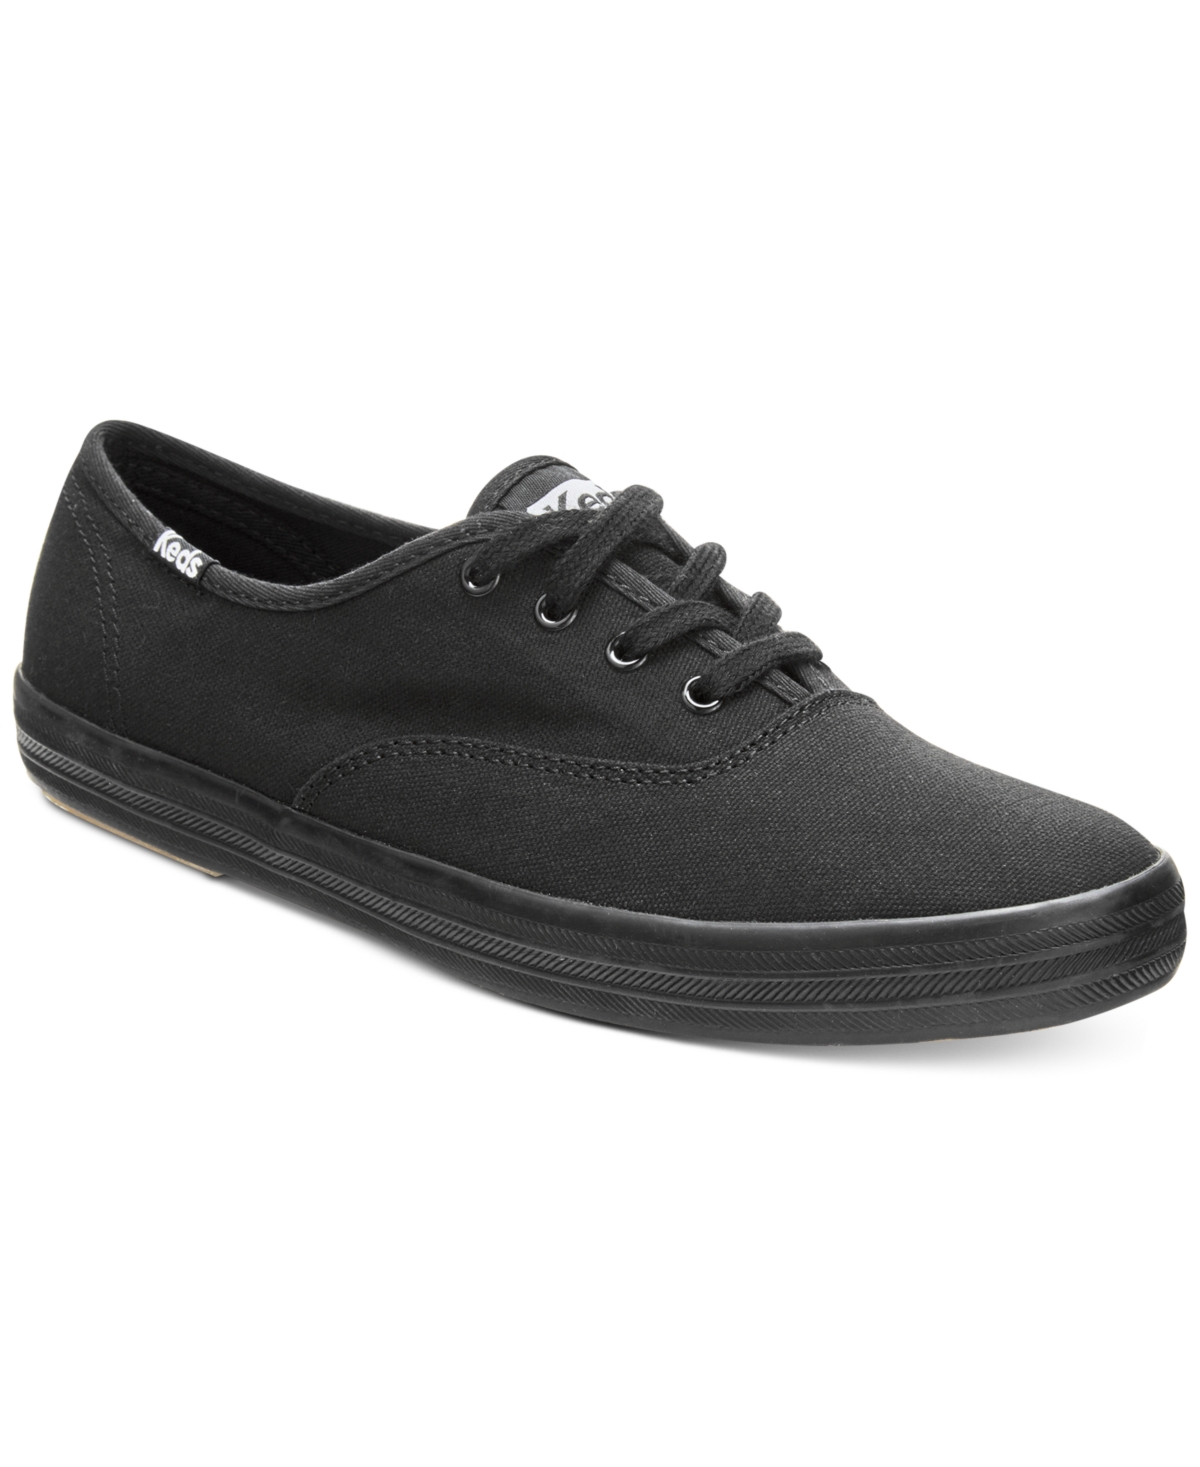 UPC 044208122775 product image for Keds Women's Champion Ortholite Lace-Up Oxford Fashion Sneakers from Finish Line | upcitemdb.com